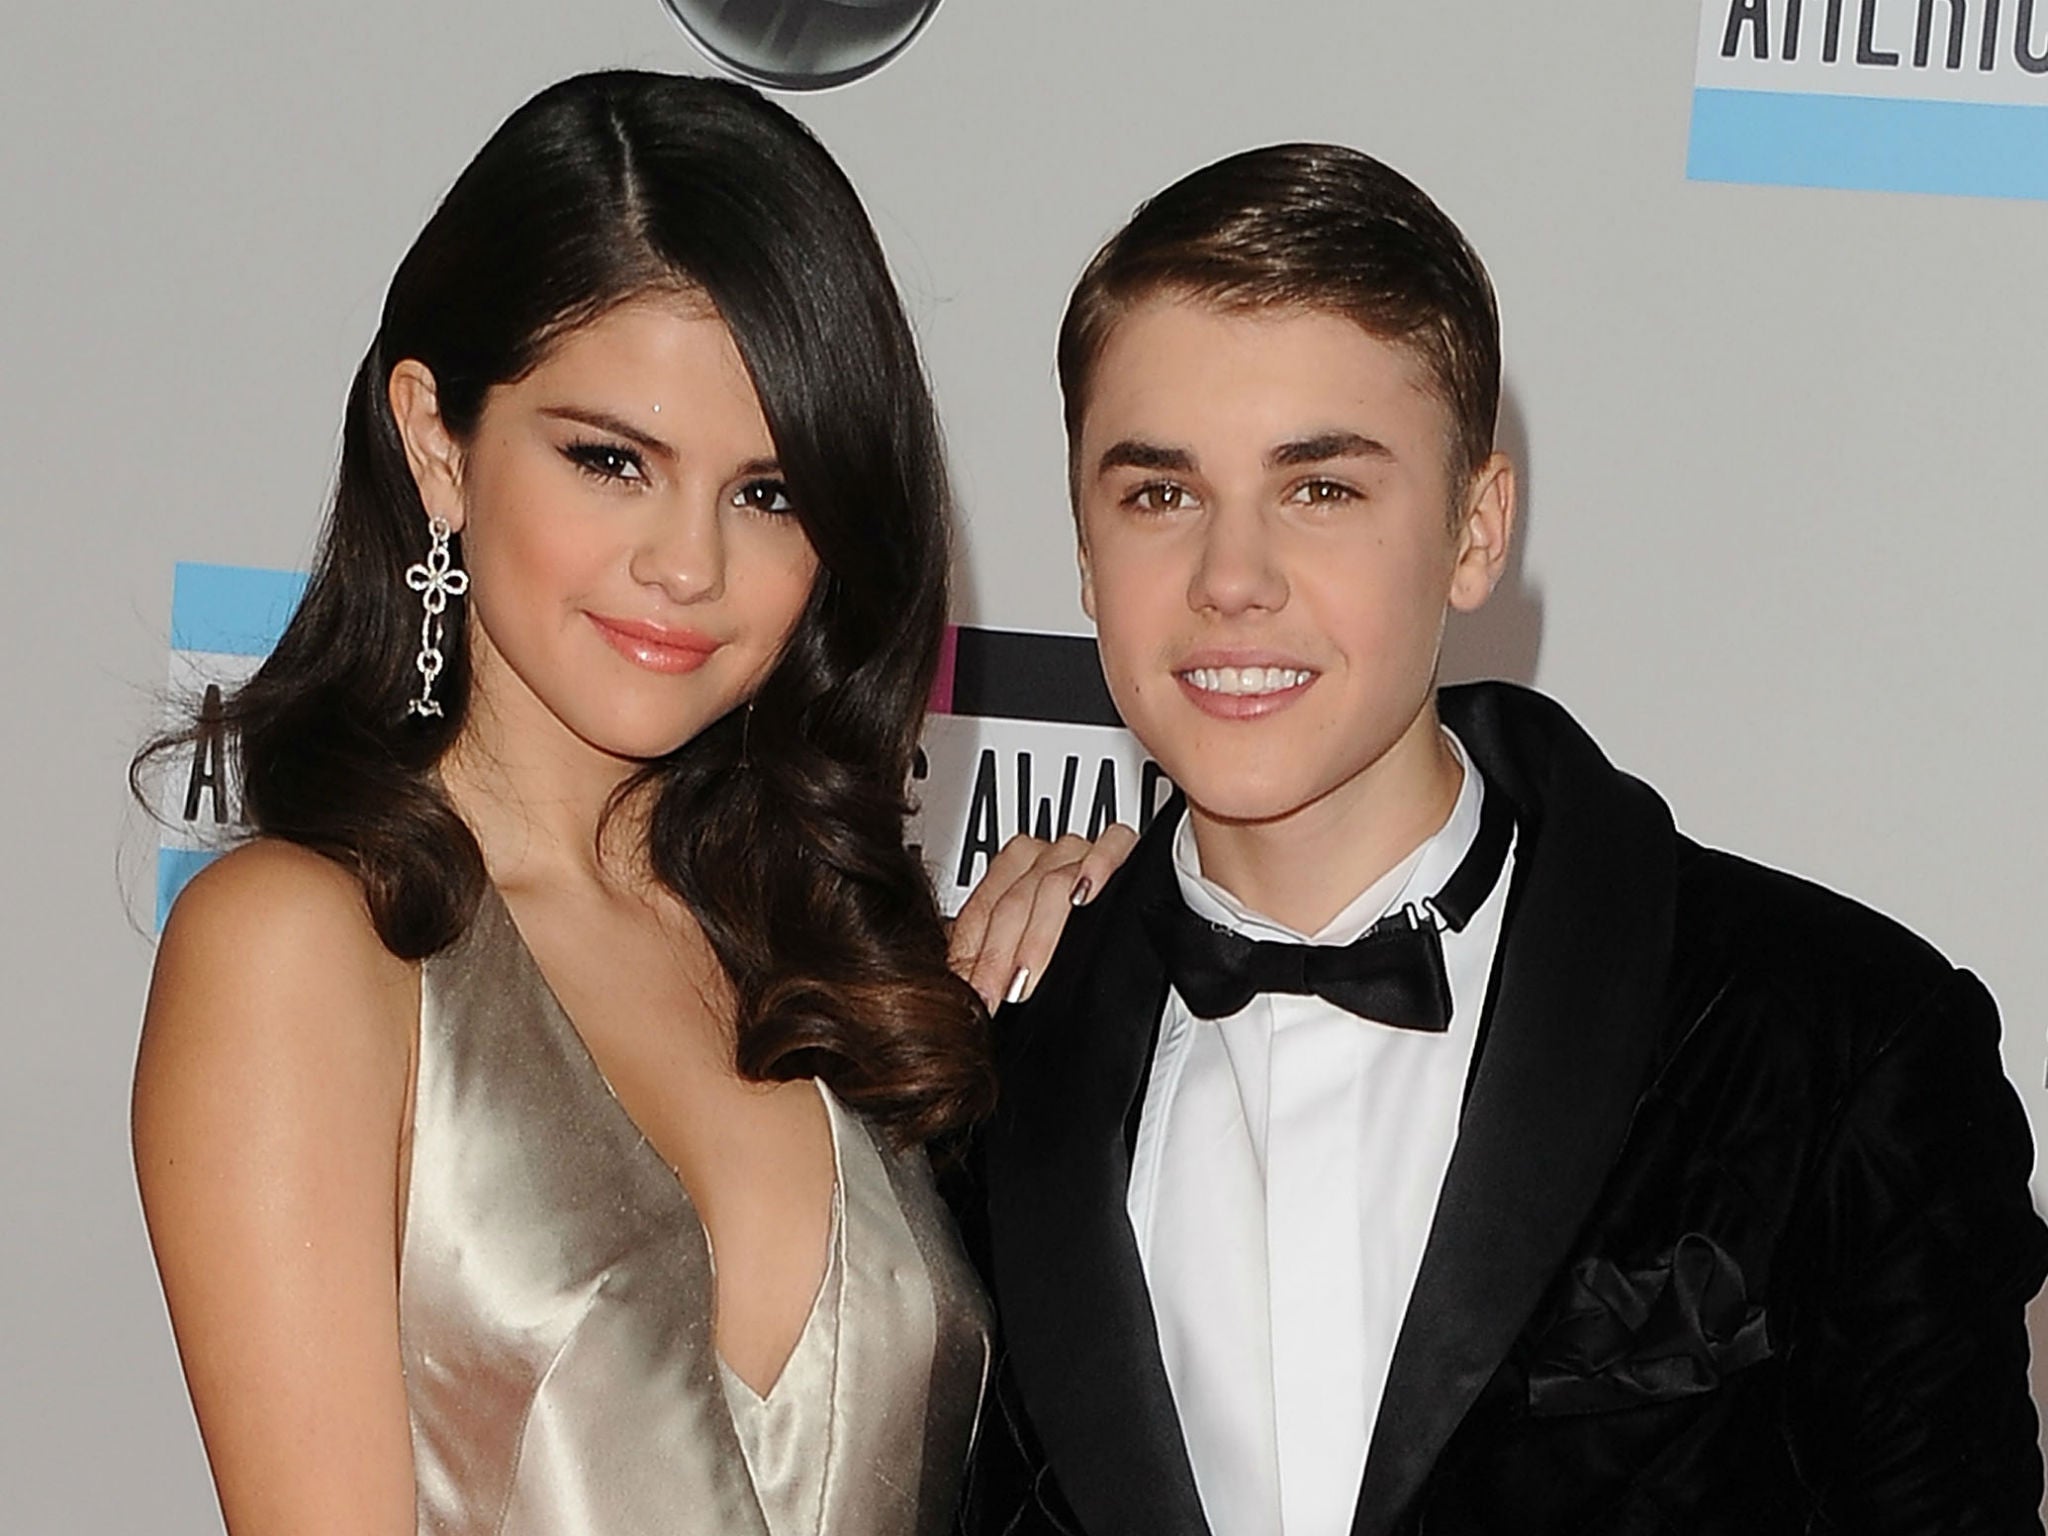 Justin Bieber tried to cover up Selena Gomez tattoo | The ...